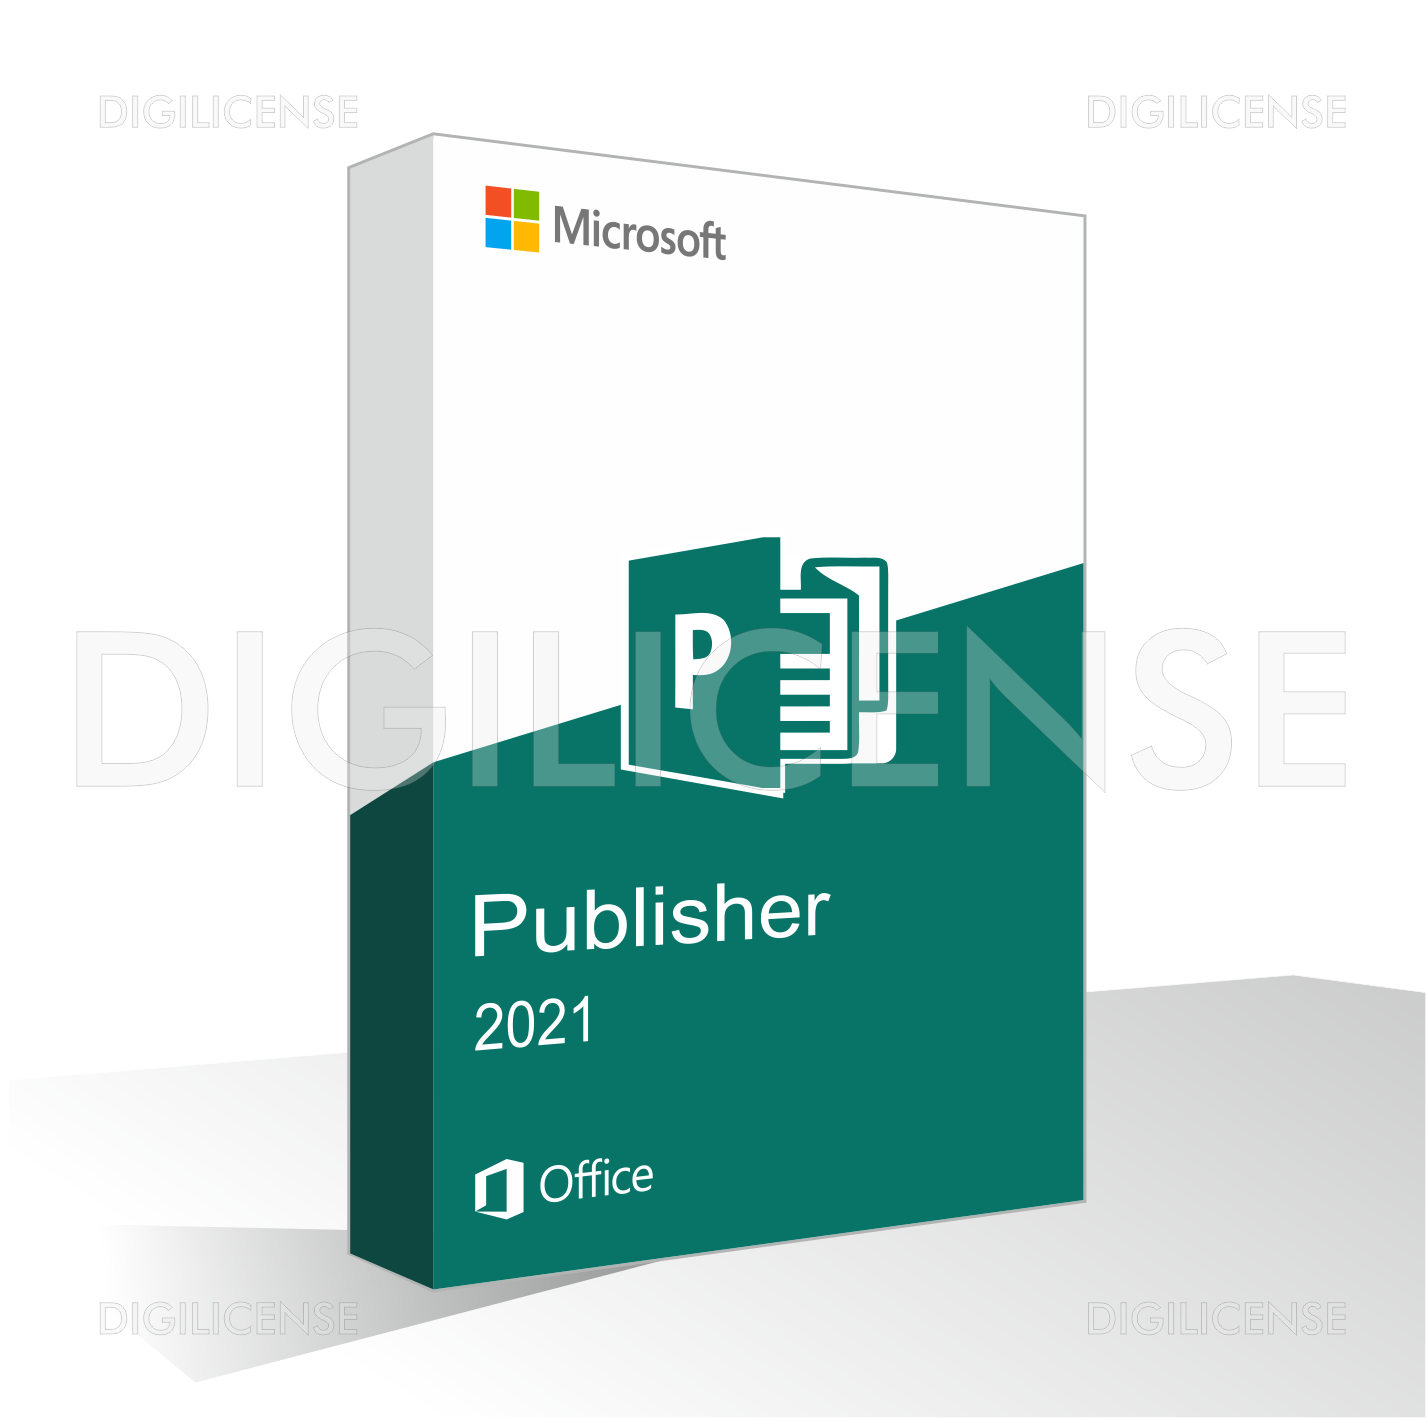 Microsoft Office Publisher 2021 free instal